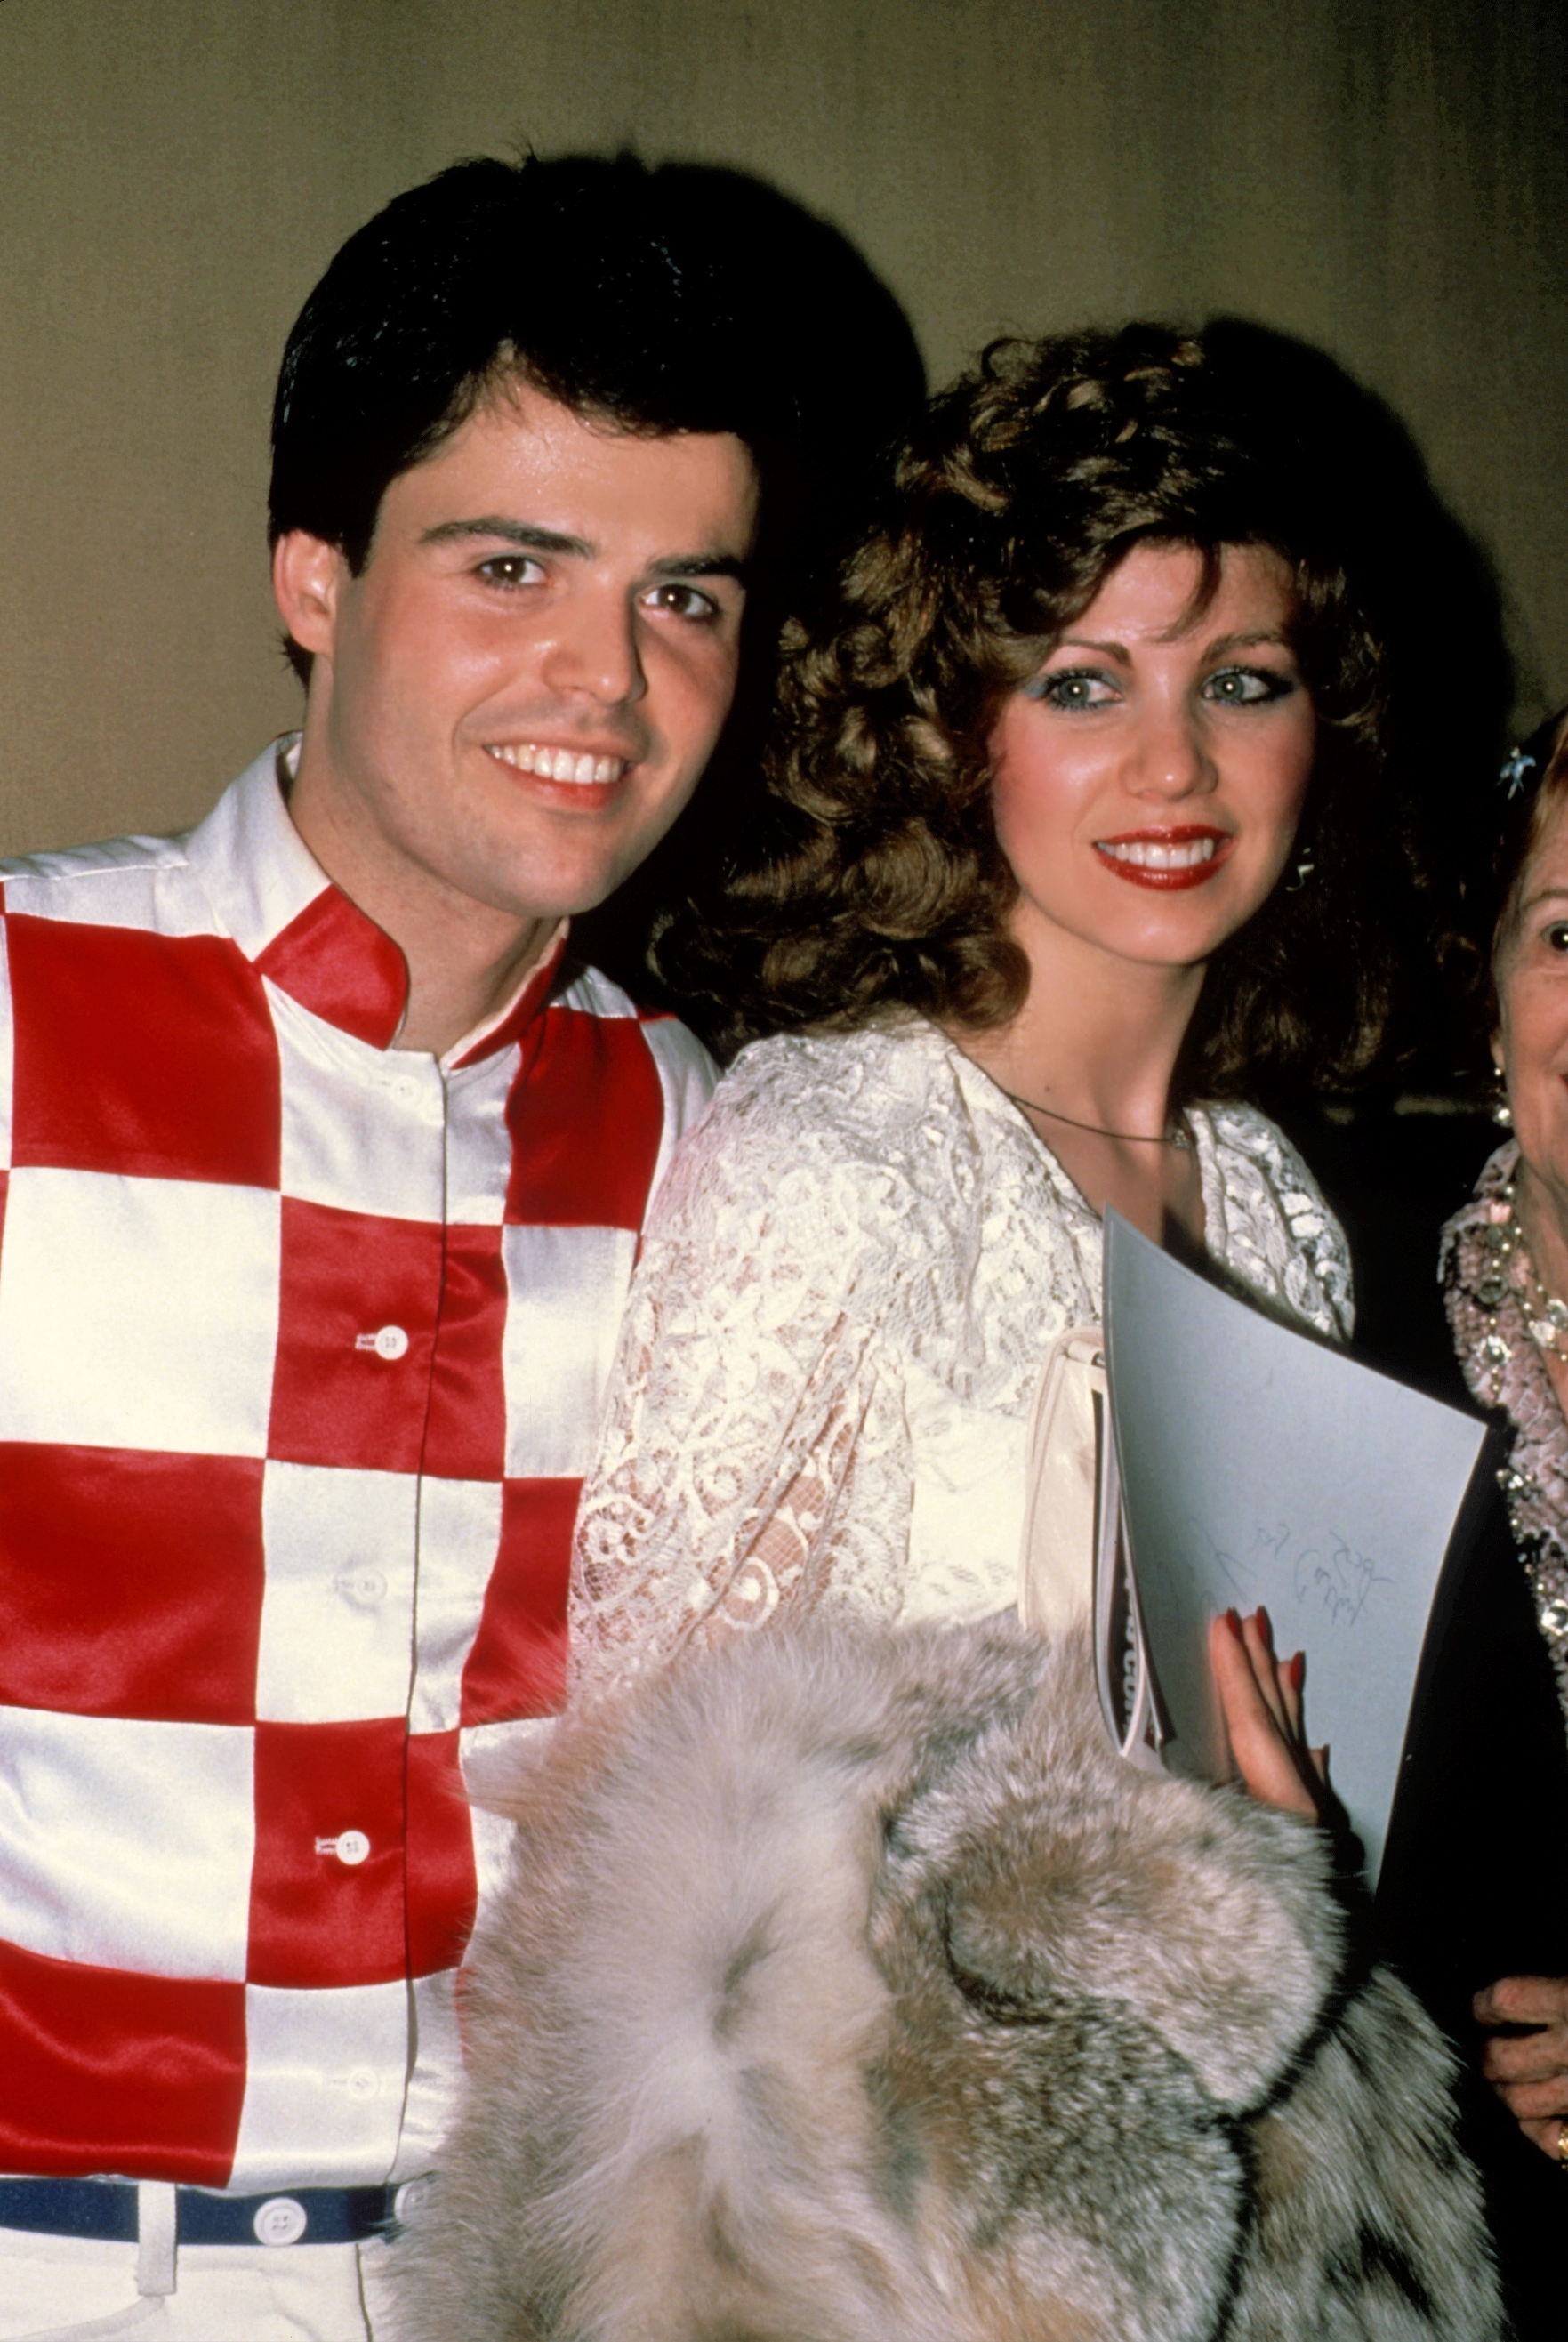 Donny Osmond and Marie Osmond in New York City in 1984 | Source: Getty Images